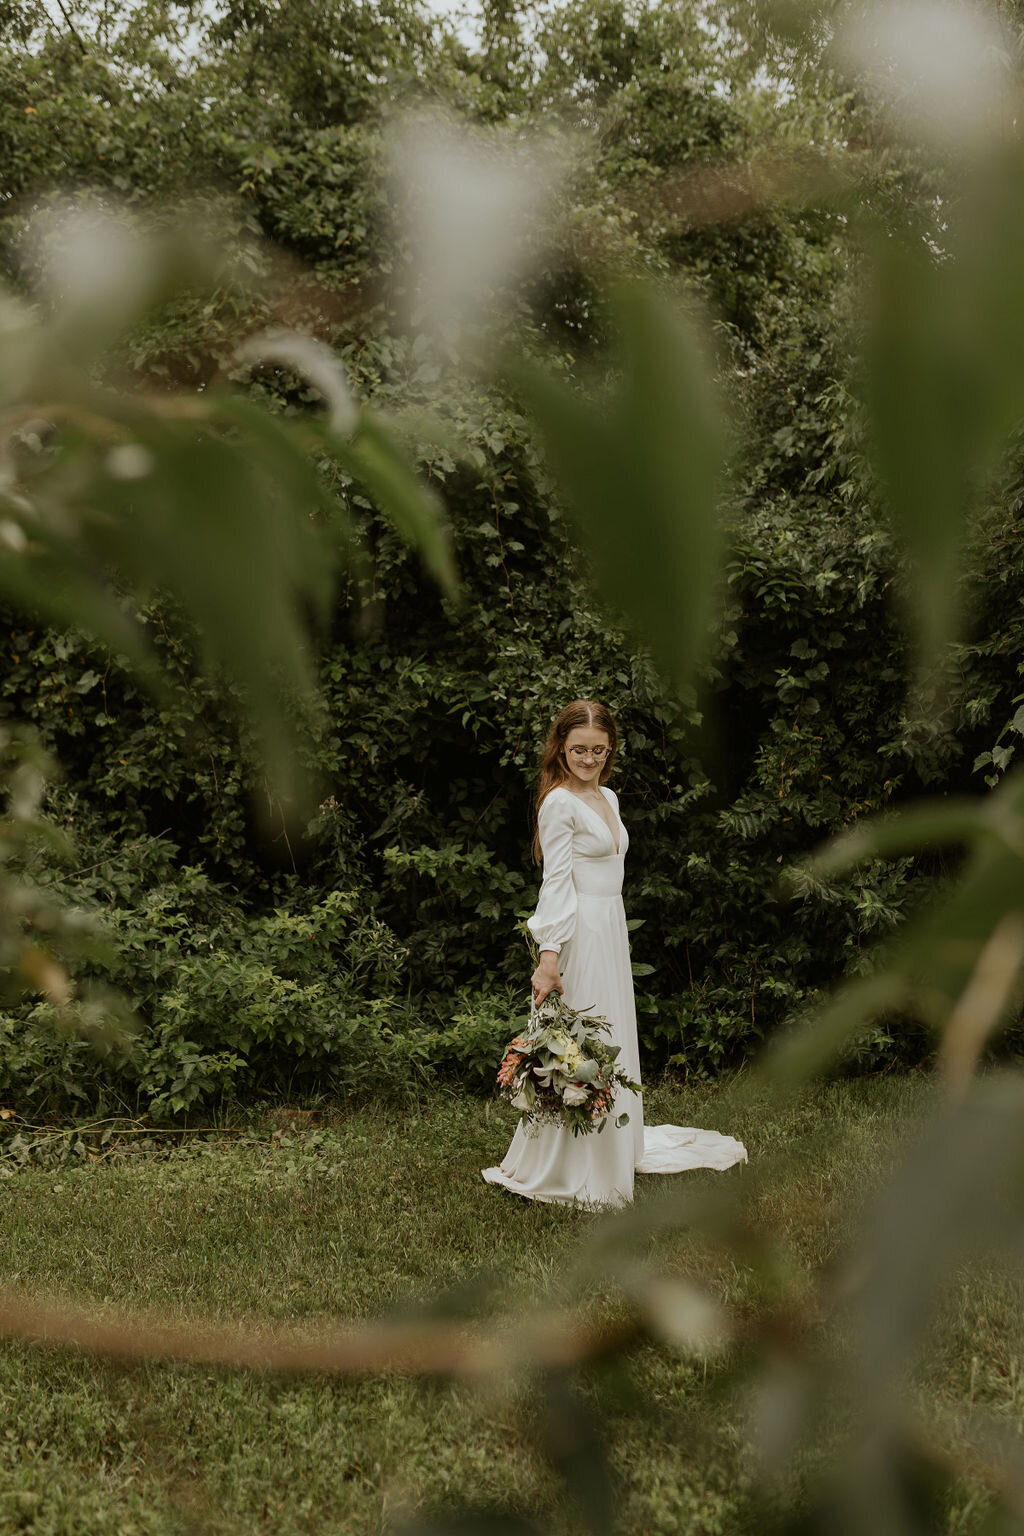 Bride standing alone in front of large green hedge while looking down at her green and white bouquet